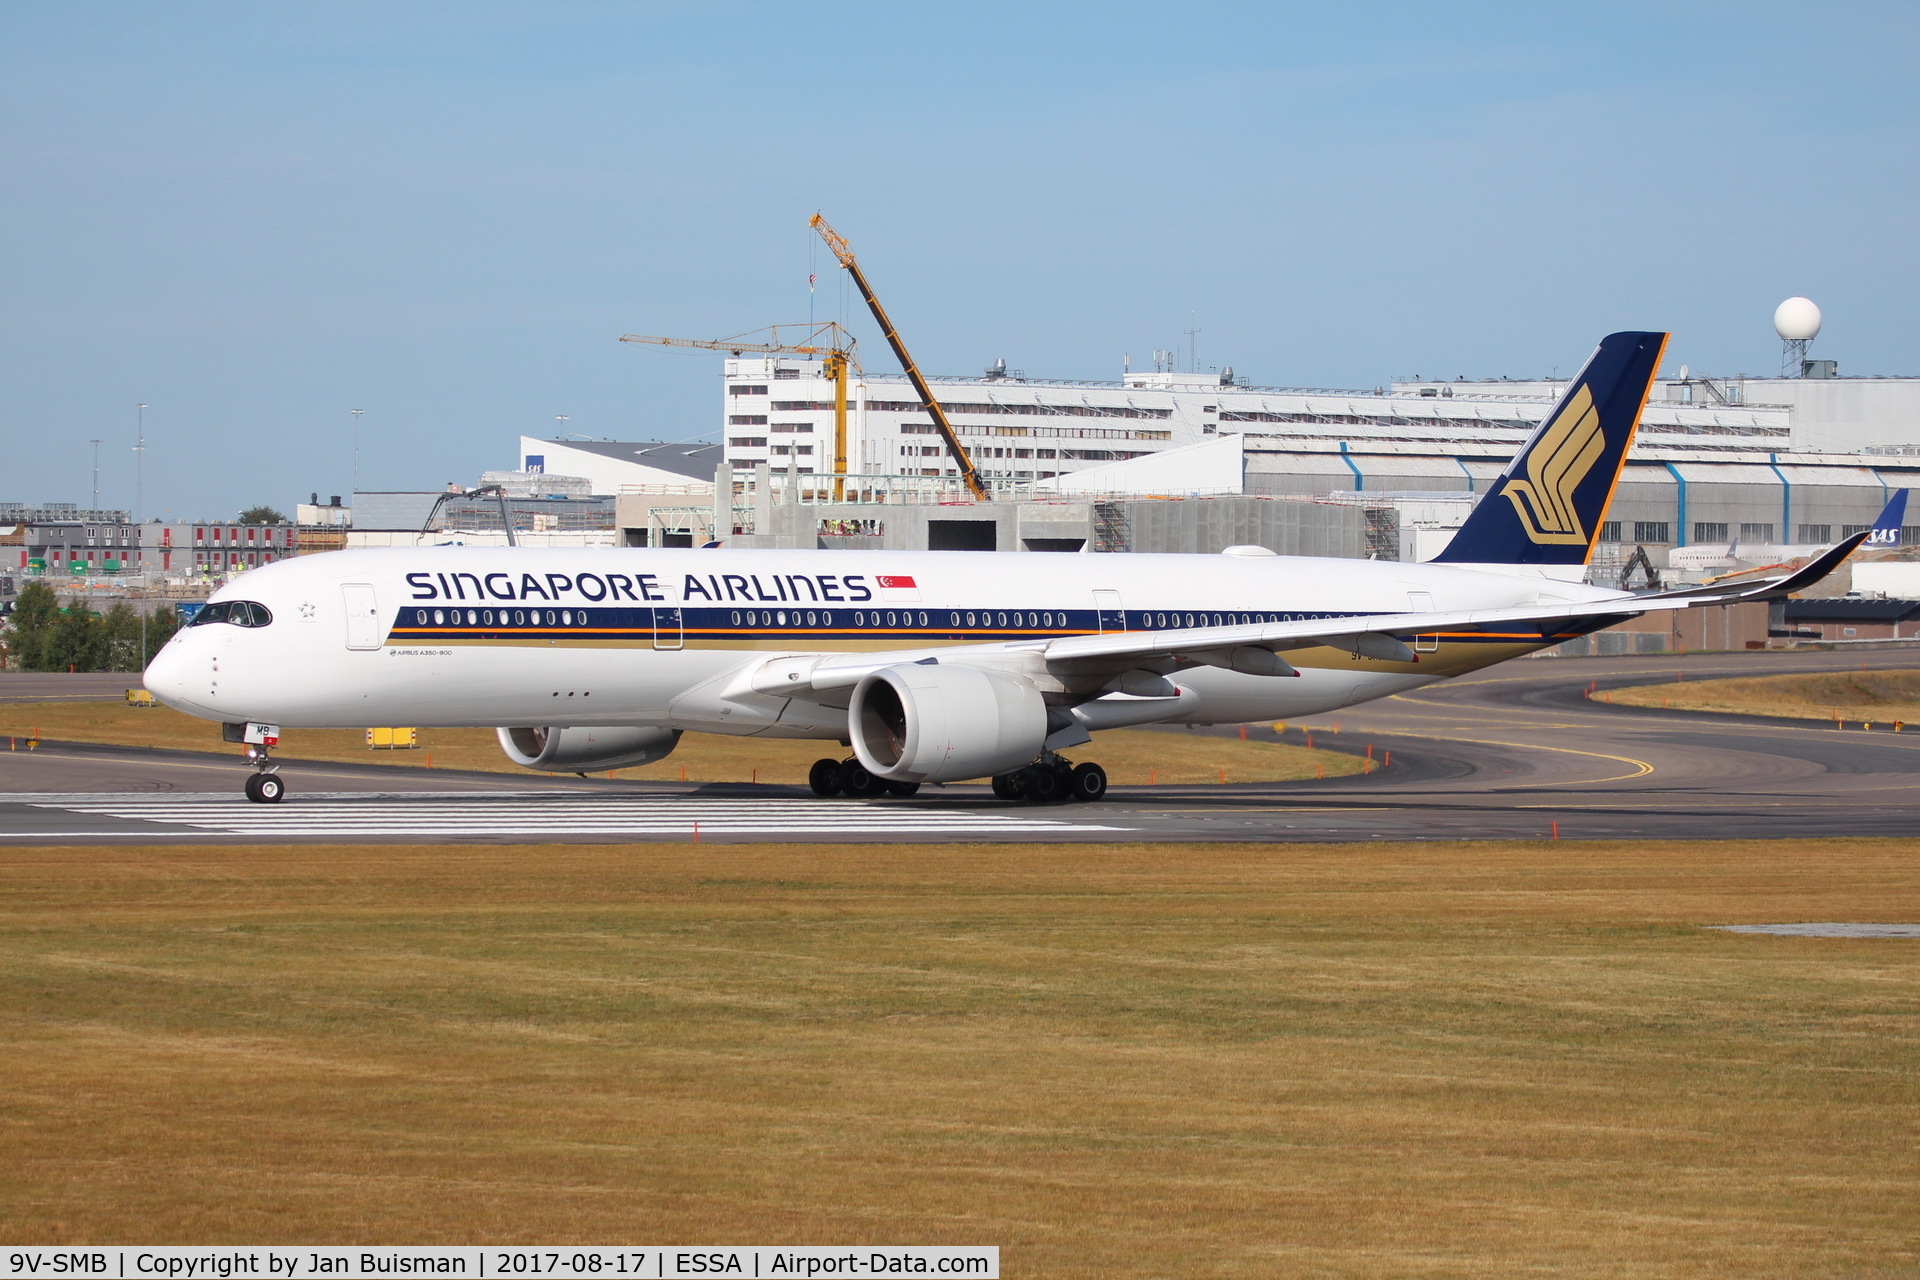 9V-SMB, 2016 Airbus A350-941 C/N 030, Singapore Airlines